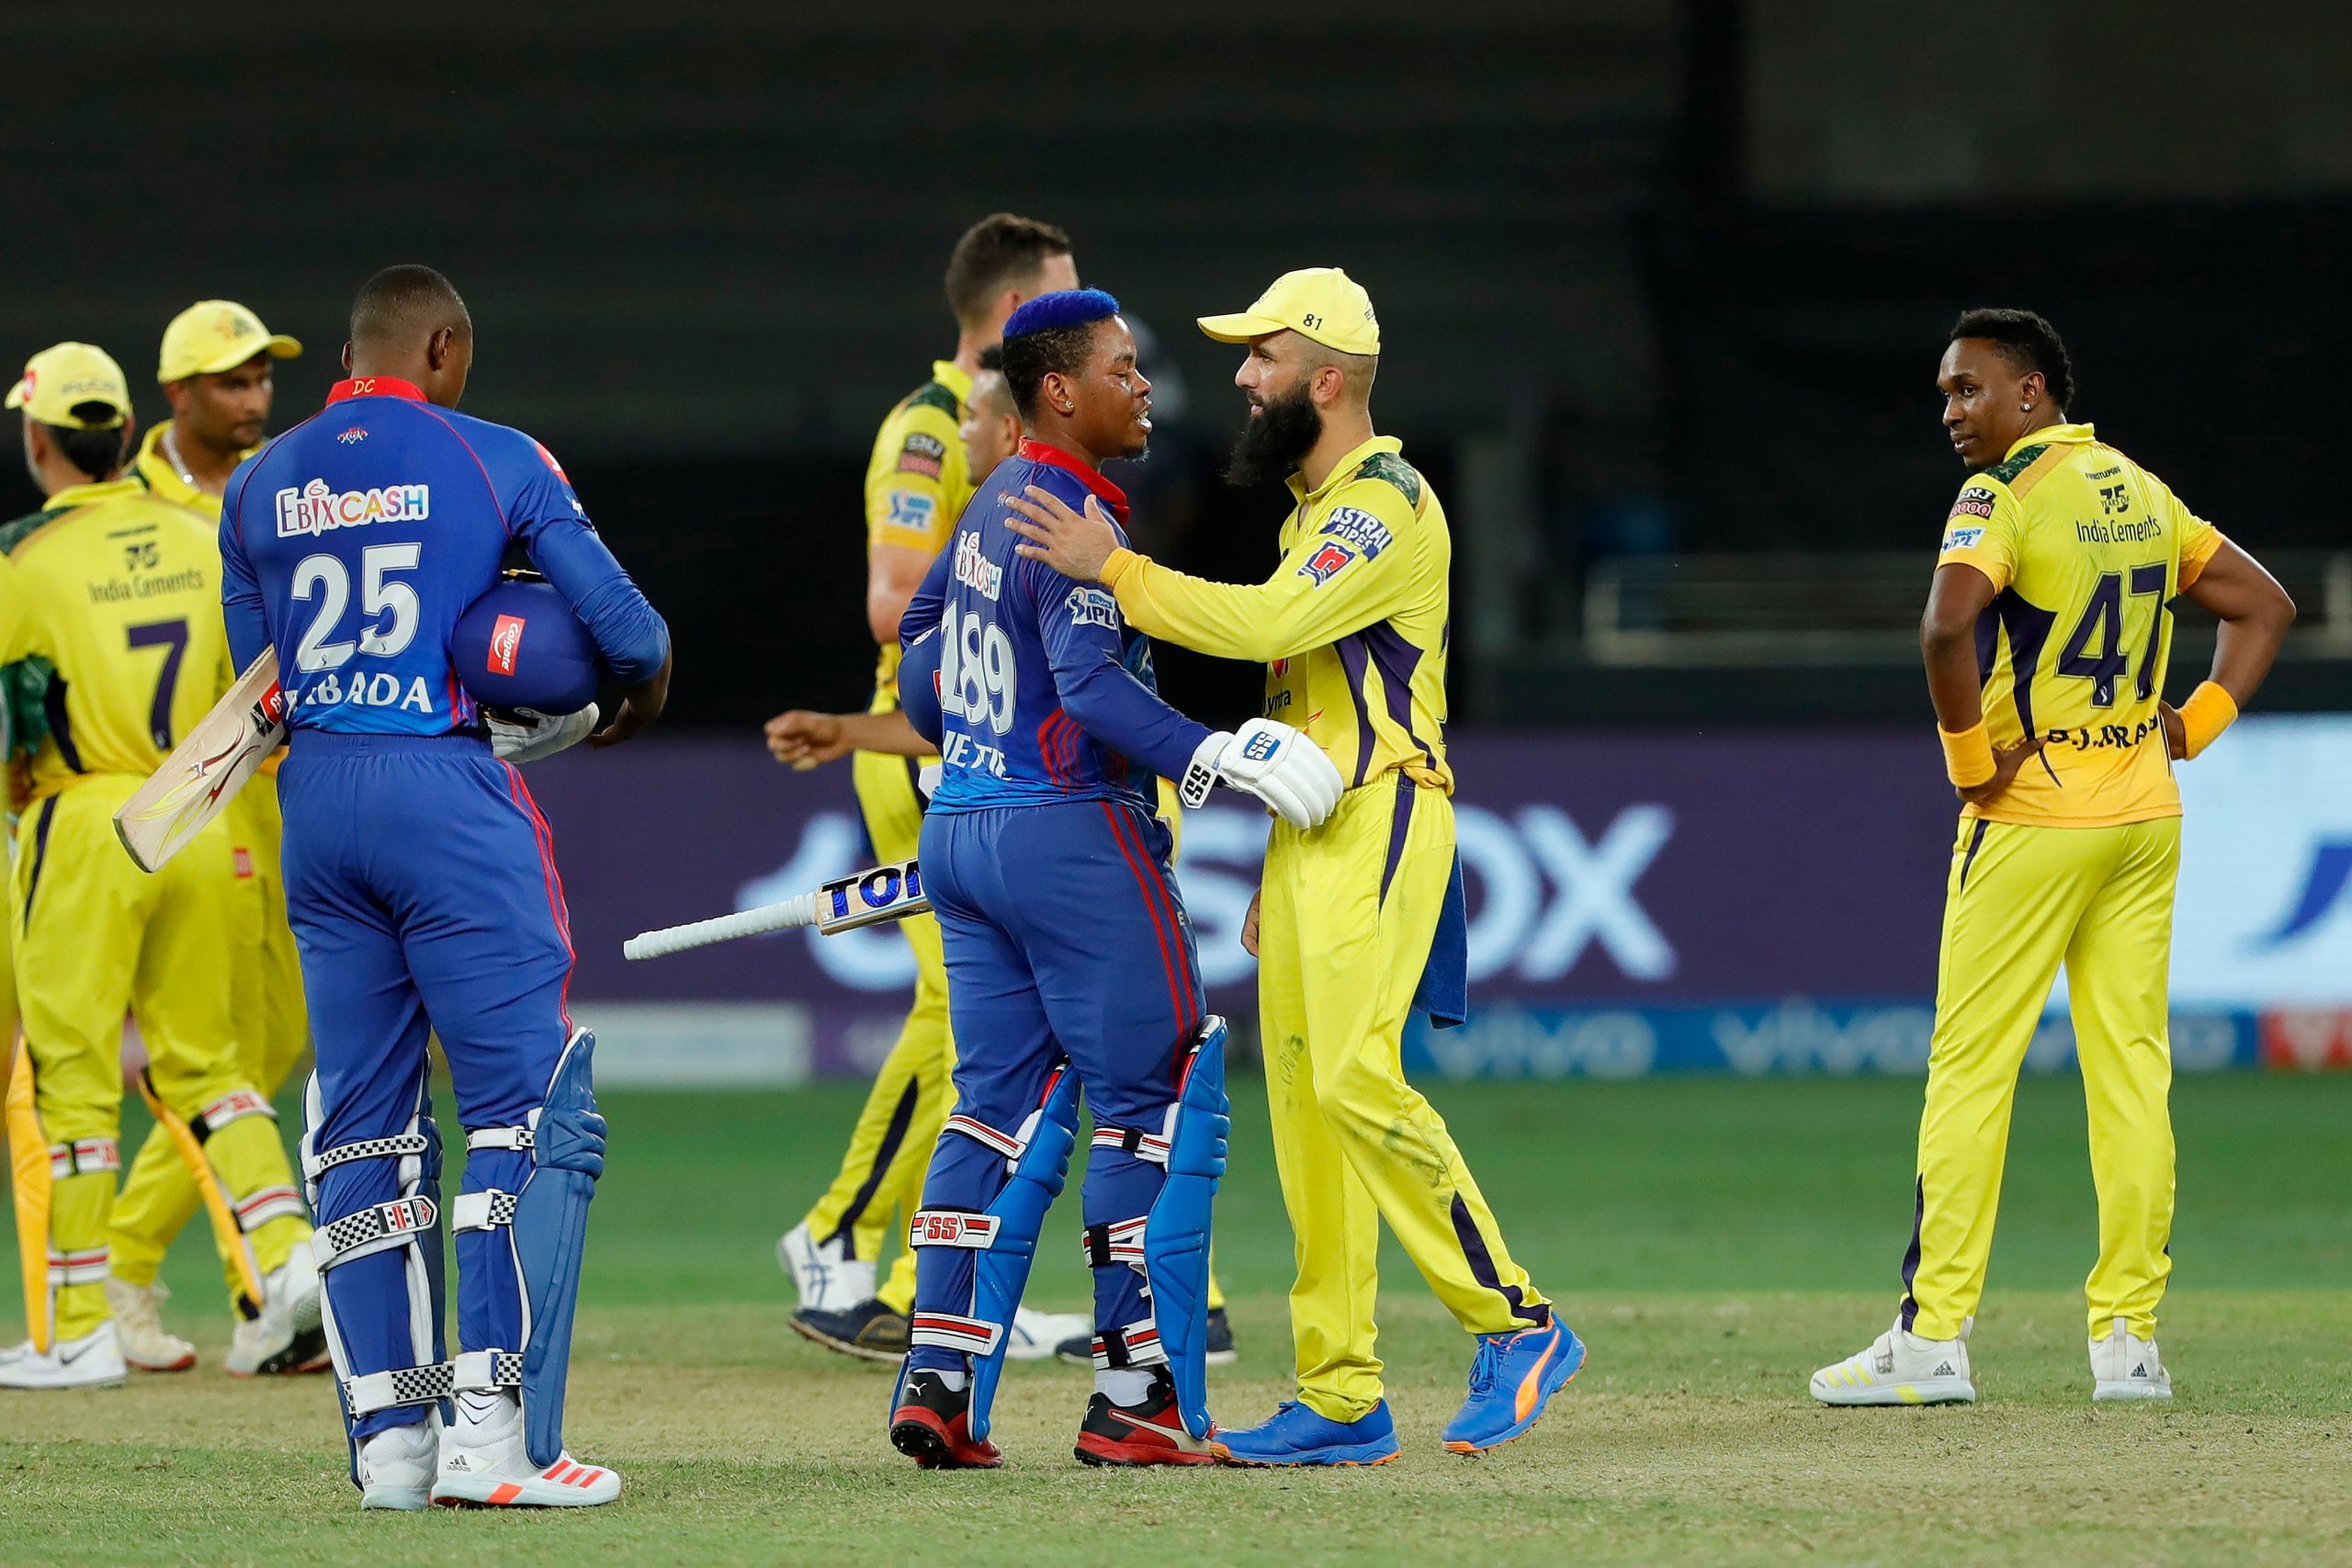 IPL video how mistakes make us better gets thumbs up from cricketers. Watch